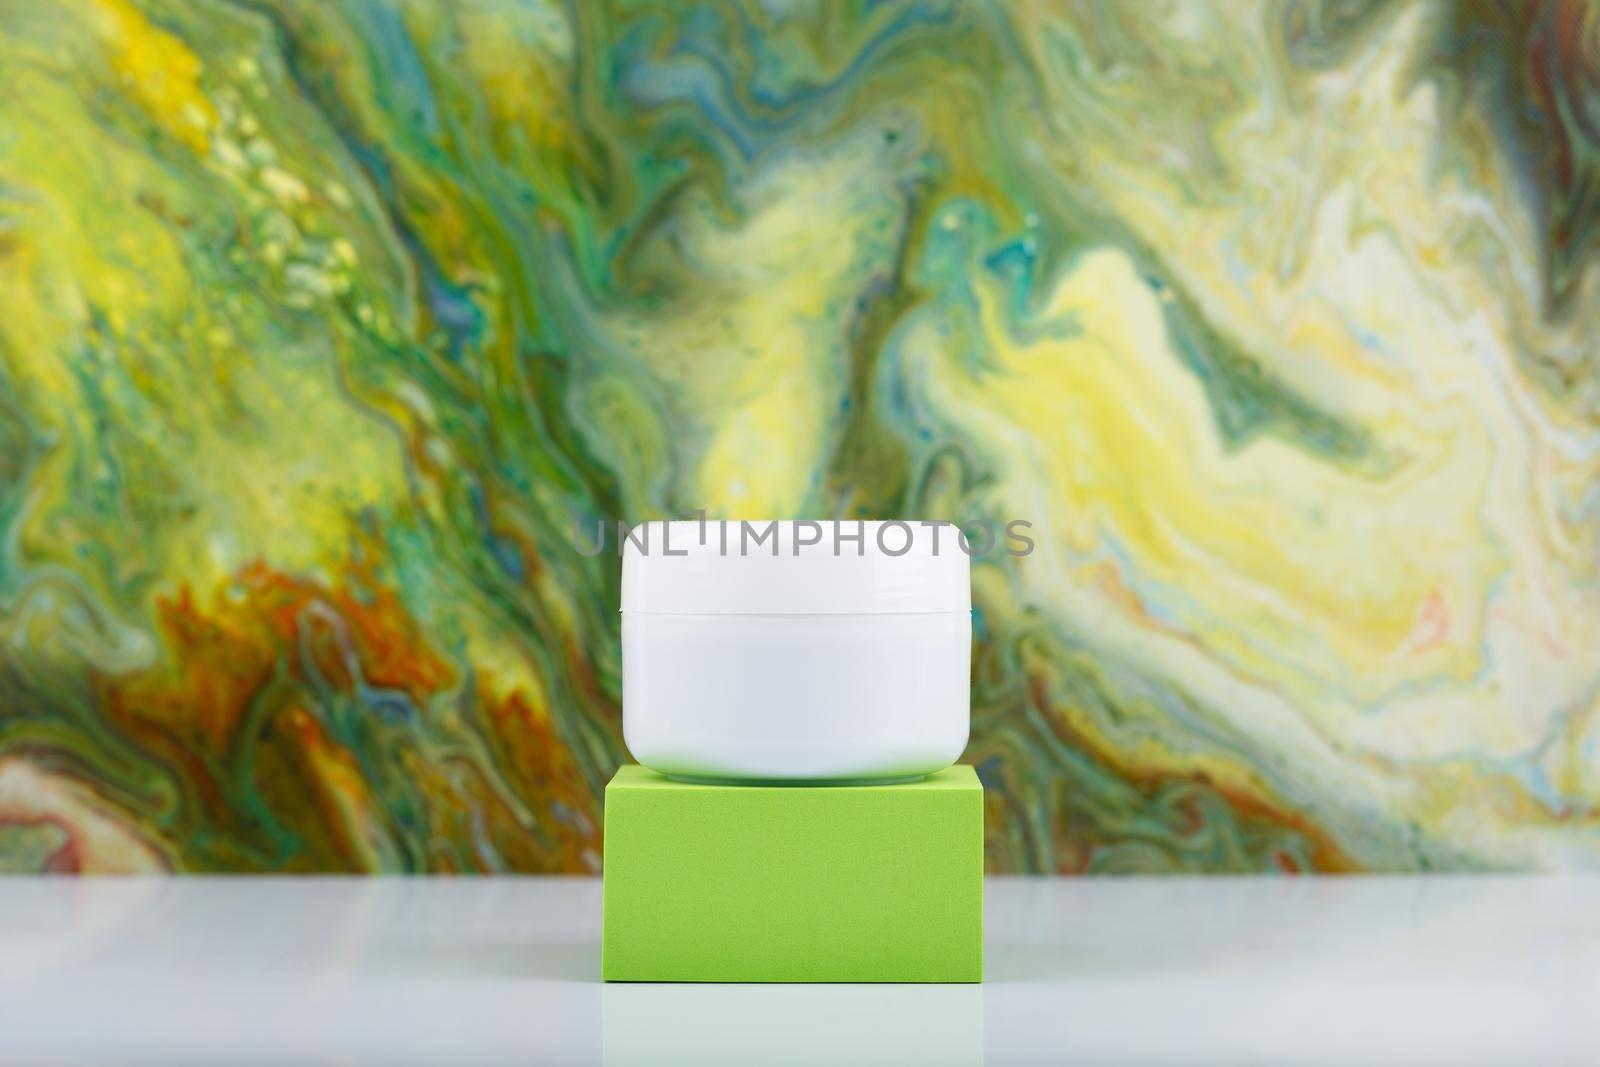 White cosmetic jar on green podium against green marbled background with copy space. Concept of beauty products by Senorina_Irina